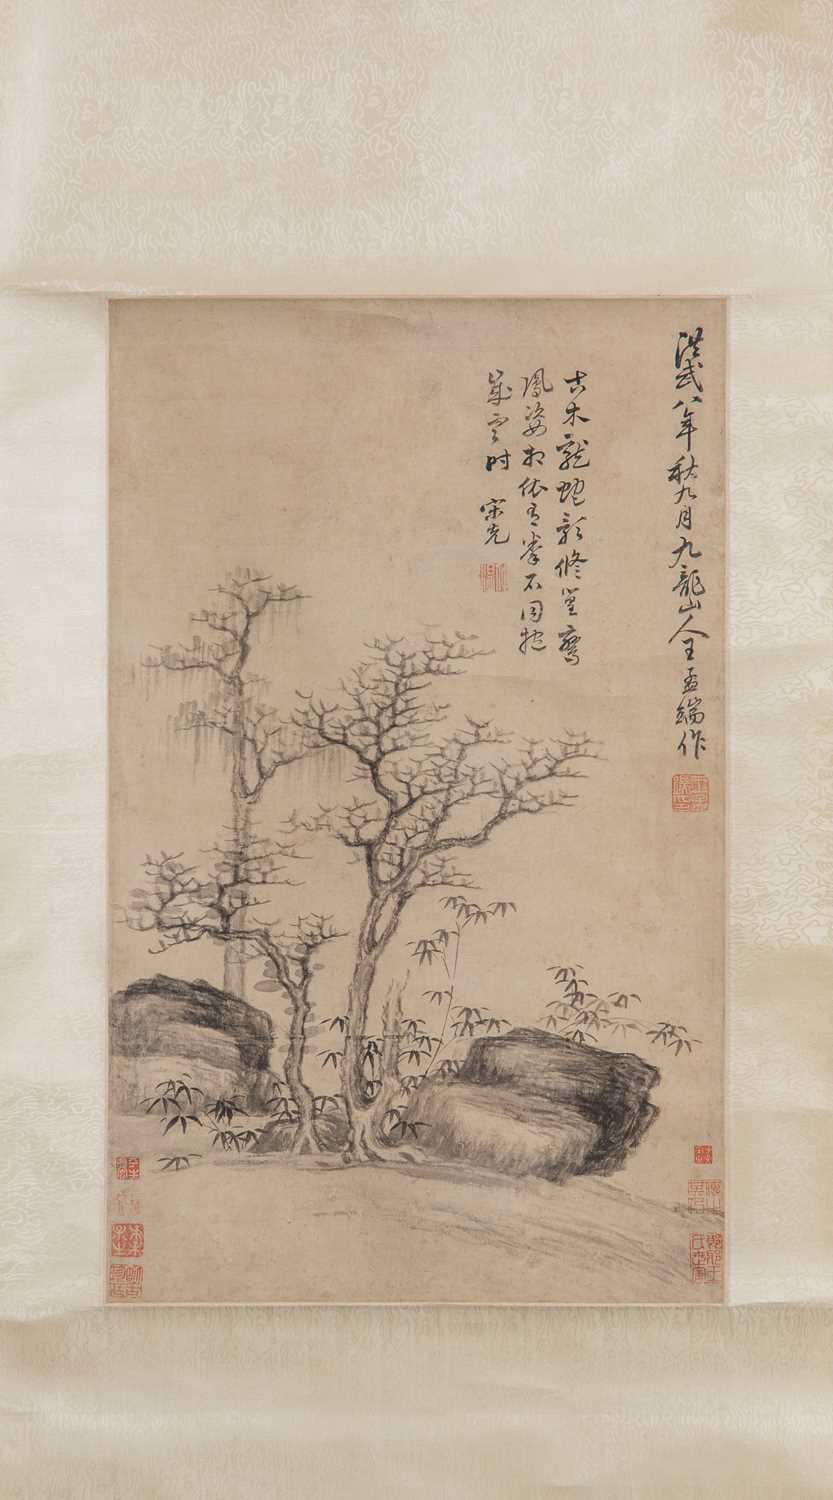 AFTER WANG FU (19TH CENTURY) PINE AND ROCK A Chinese scroll painting, ink on paper, with the - Image 2 of 2